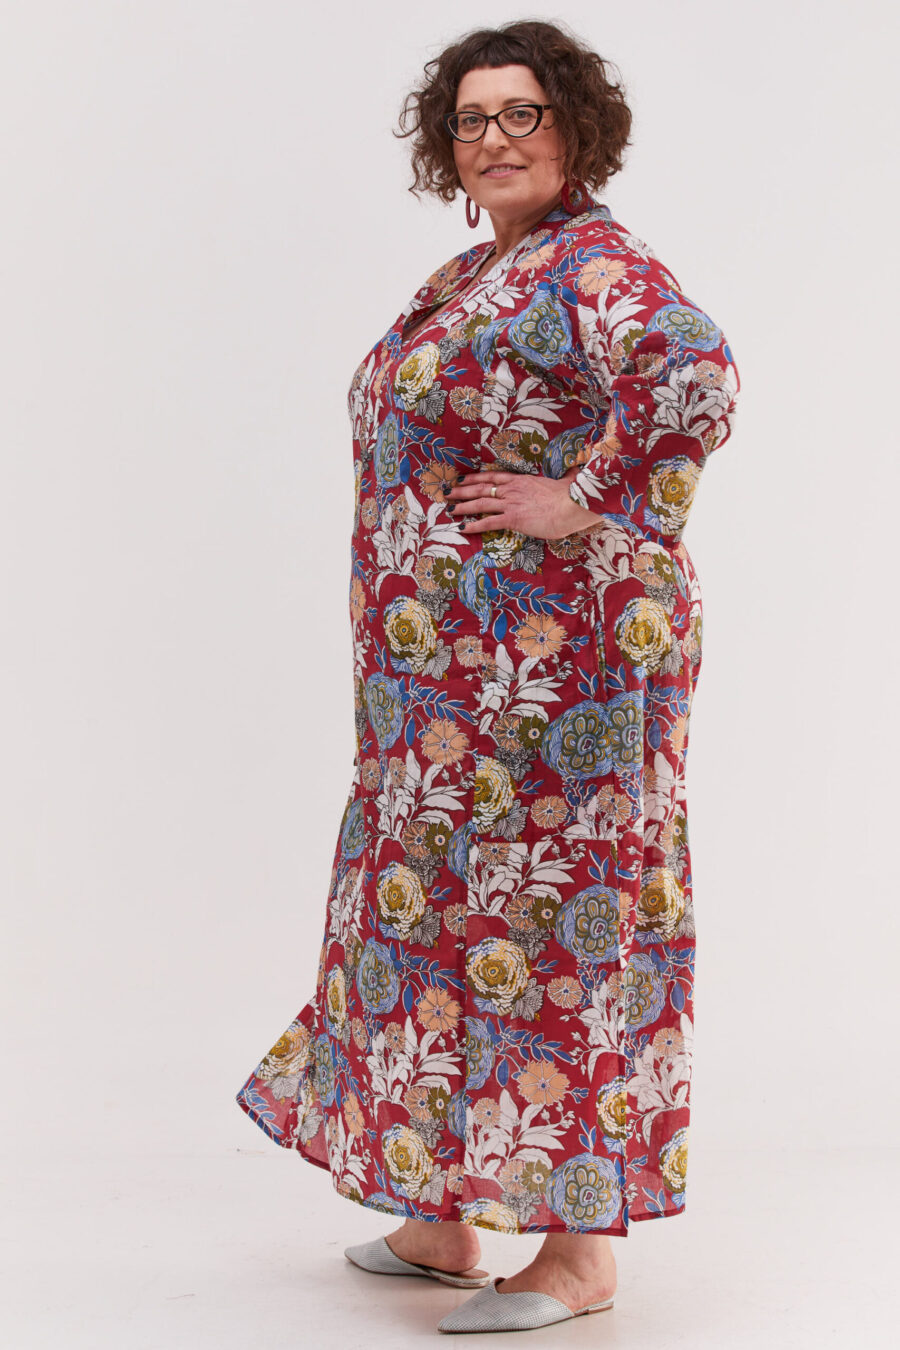 Jalabiya dress | Uniquely designed dress - Red blossom, colorful floral print on a red dress by comfort zone boutique